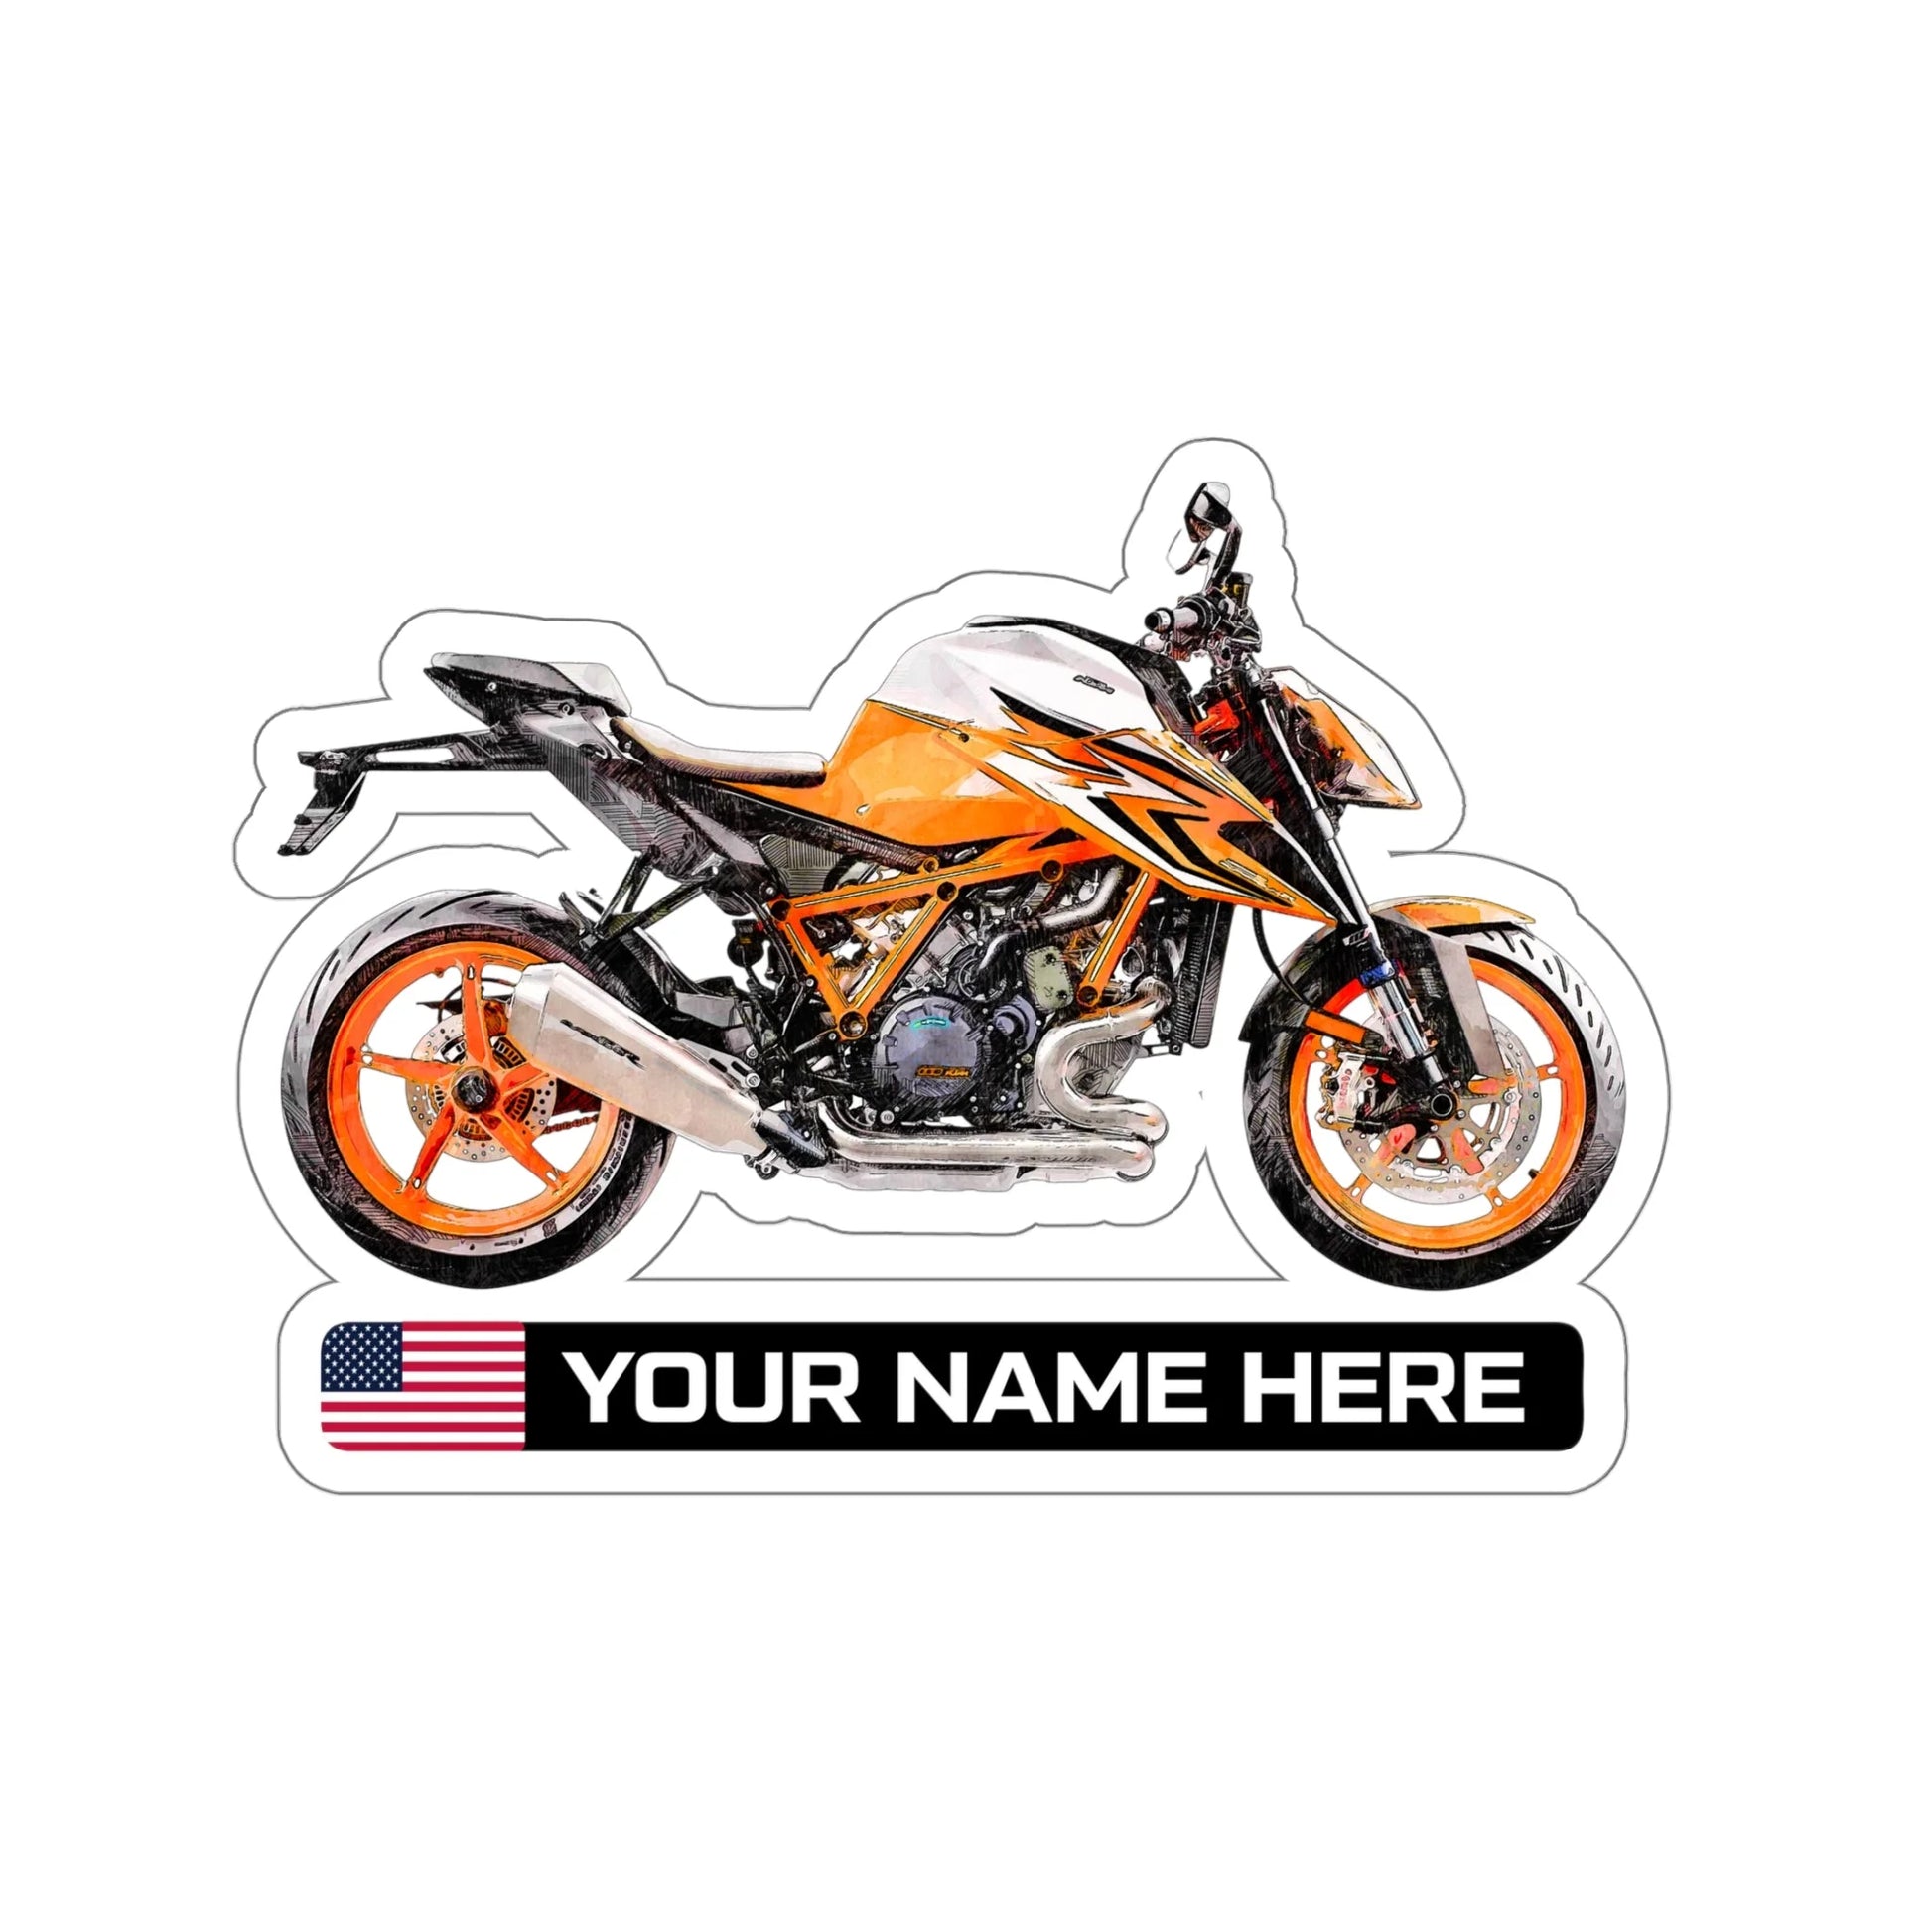 DRAW MY MOTORCYCLE Sticker National Flag